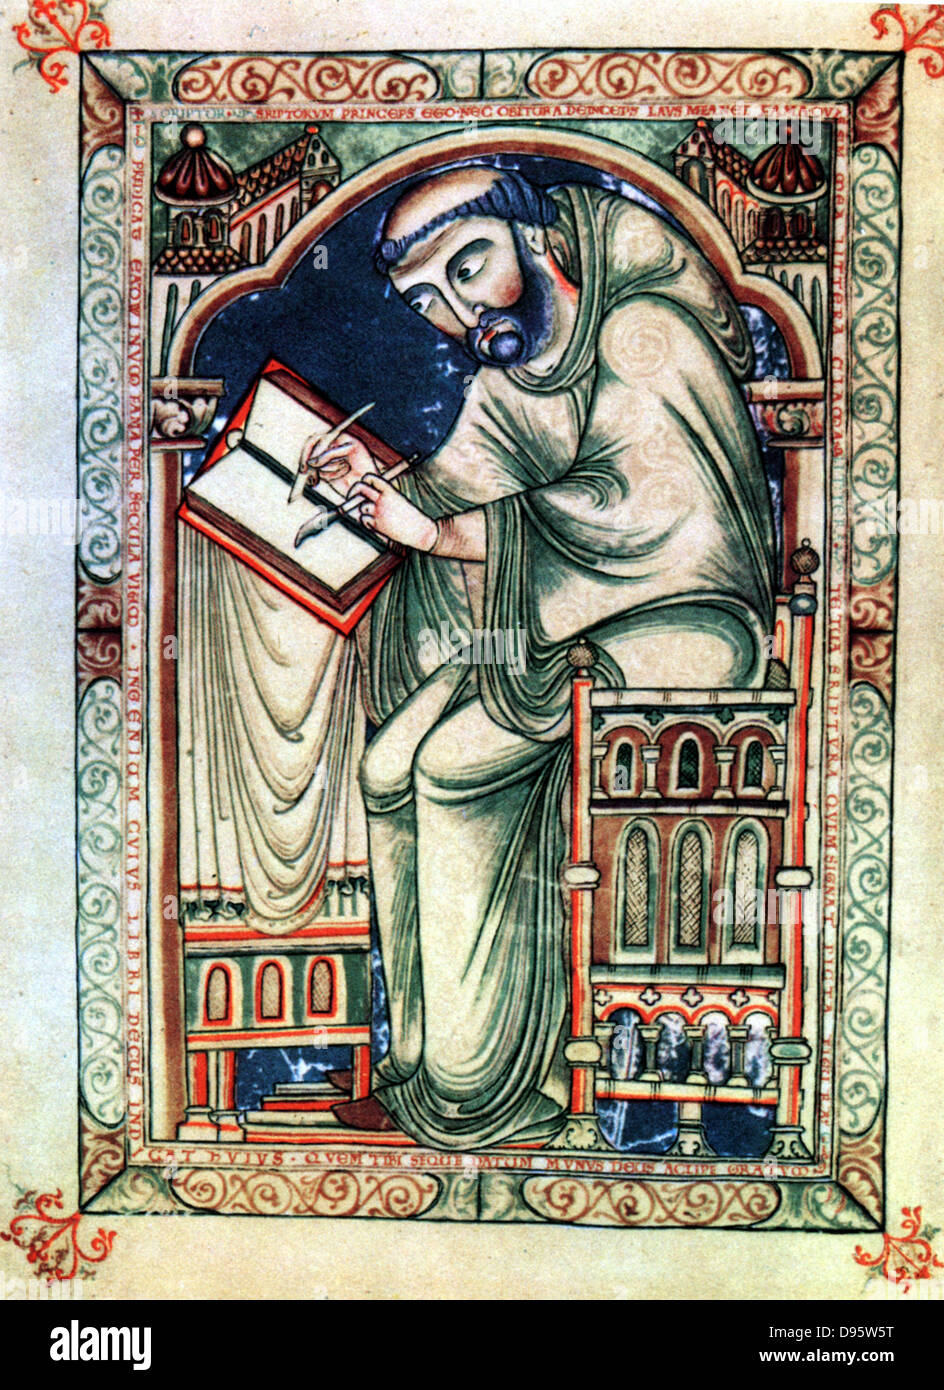 Eadwine the Scribe. From Psalter written at Christ Church, Canterbury about middle of 12th century by Eadwine, a monk of the house. Stock Photo